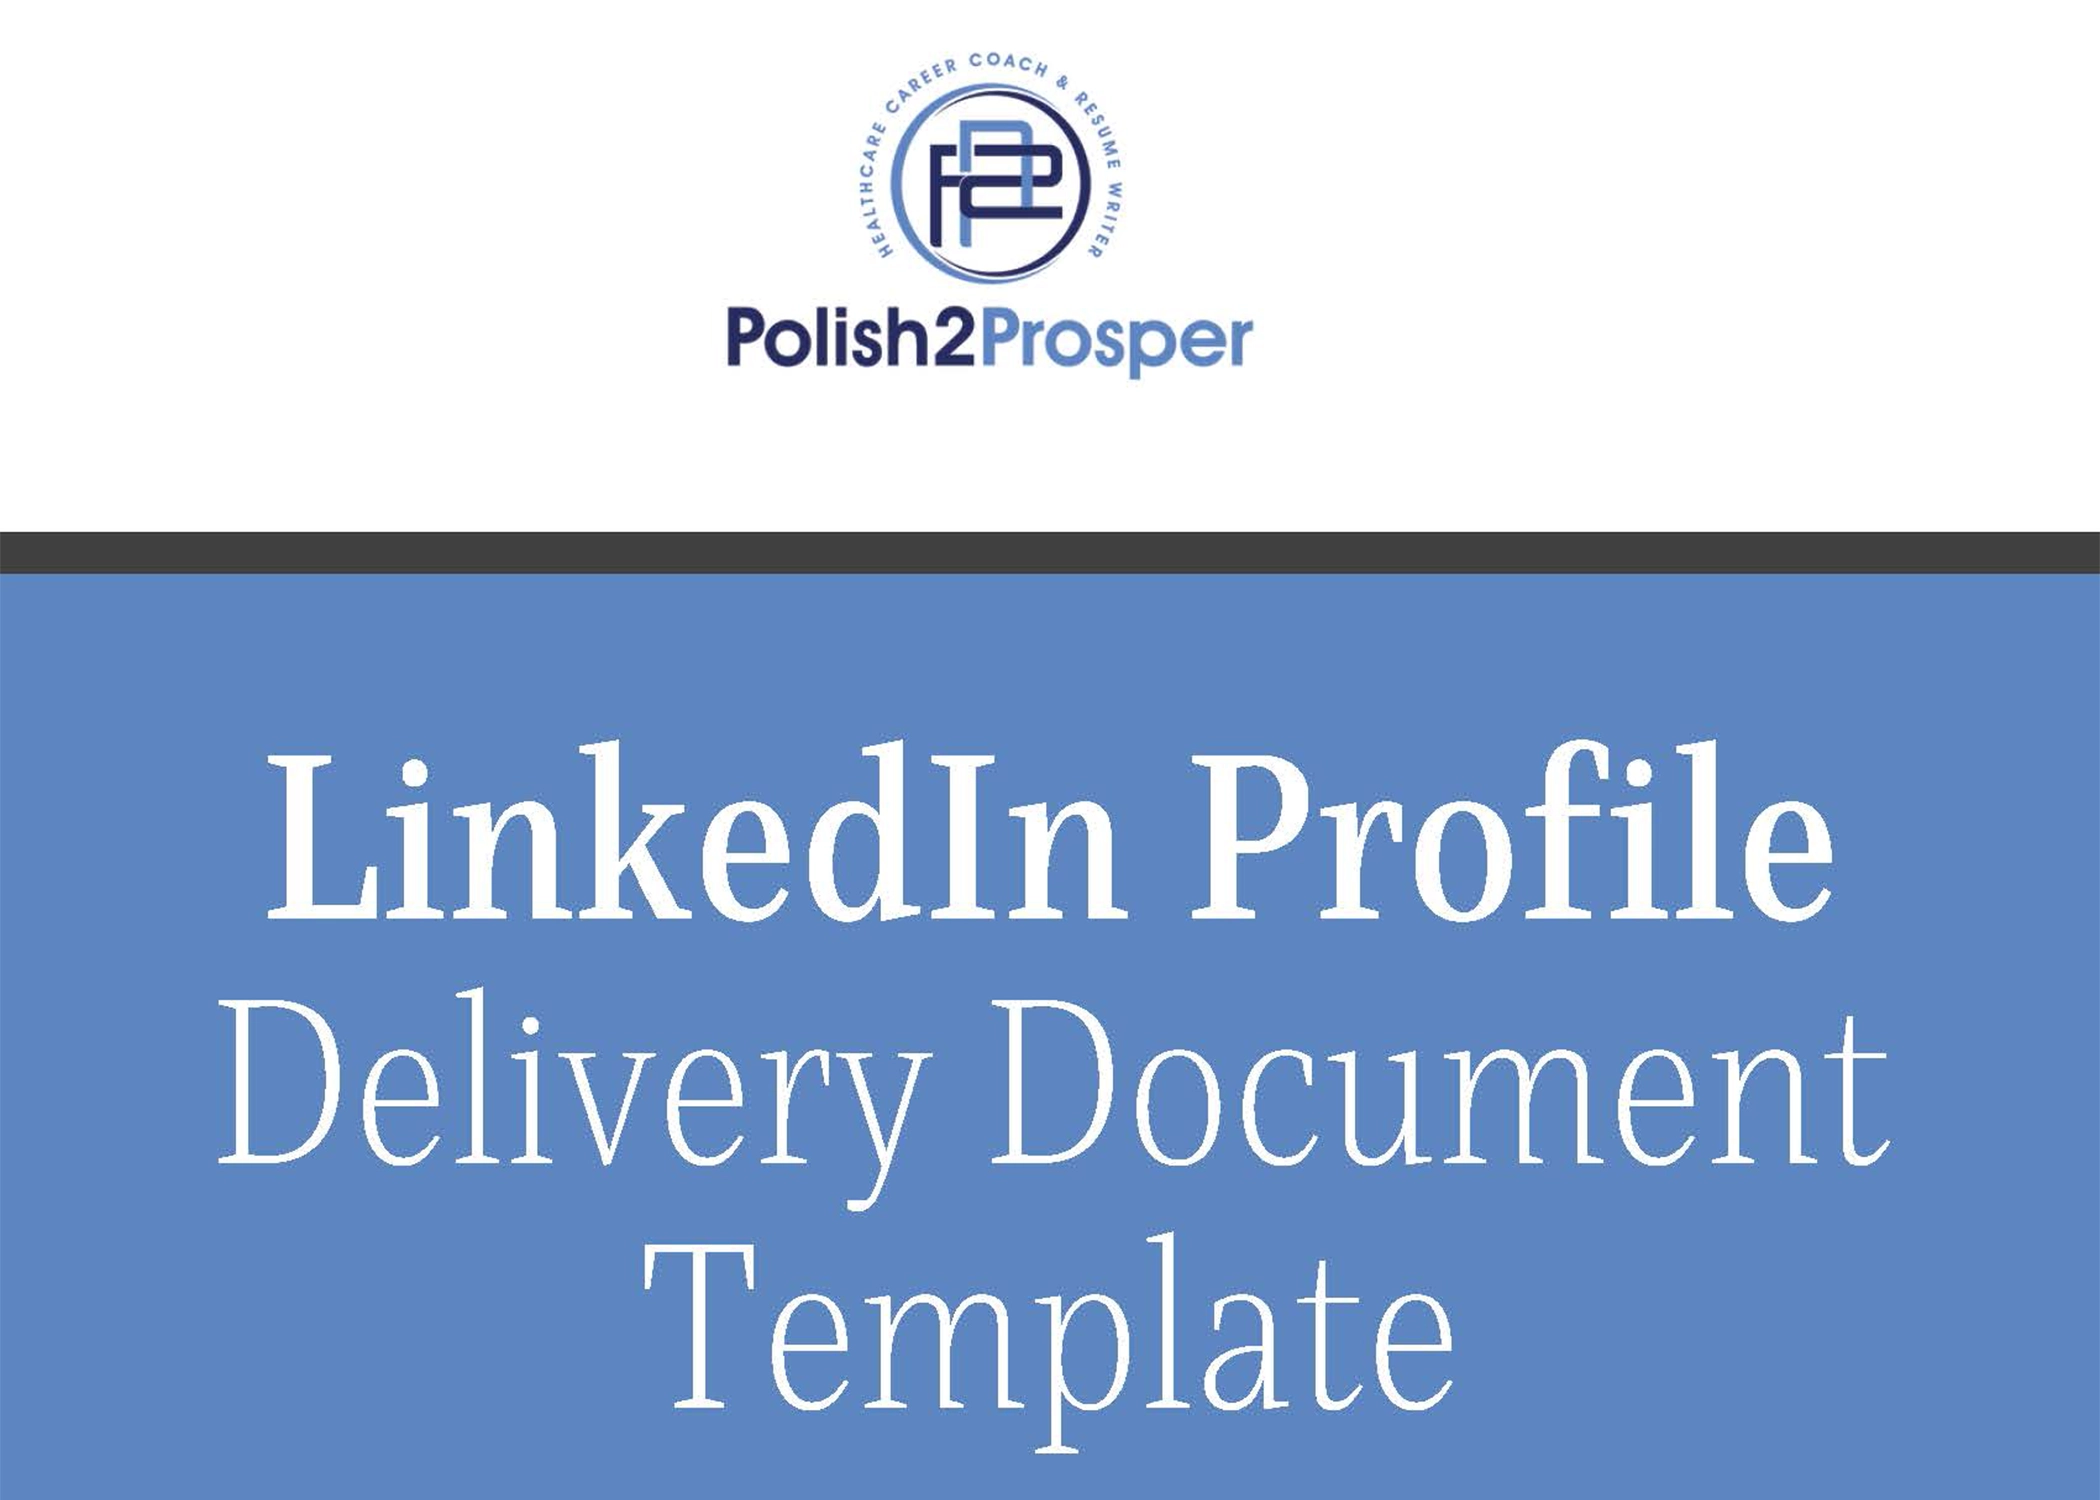 LinkedIn Profile Delivery Document Template